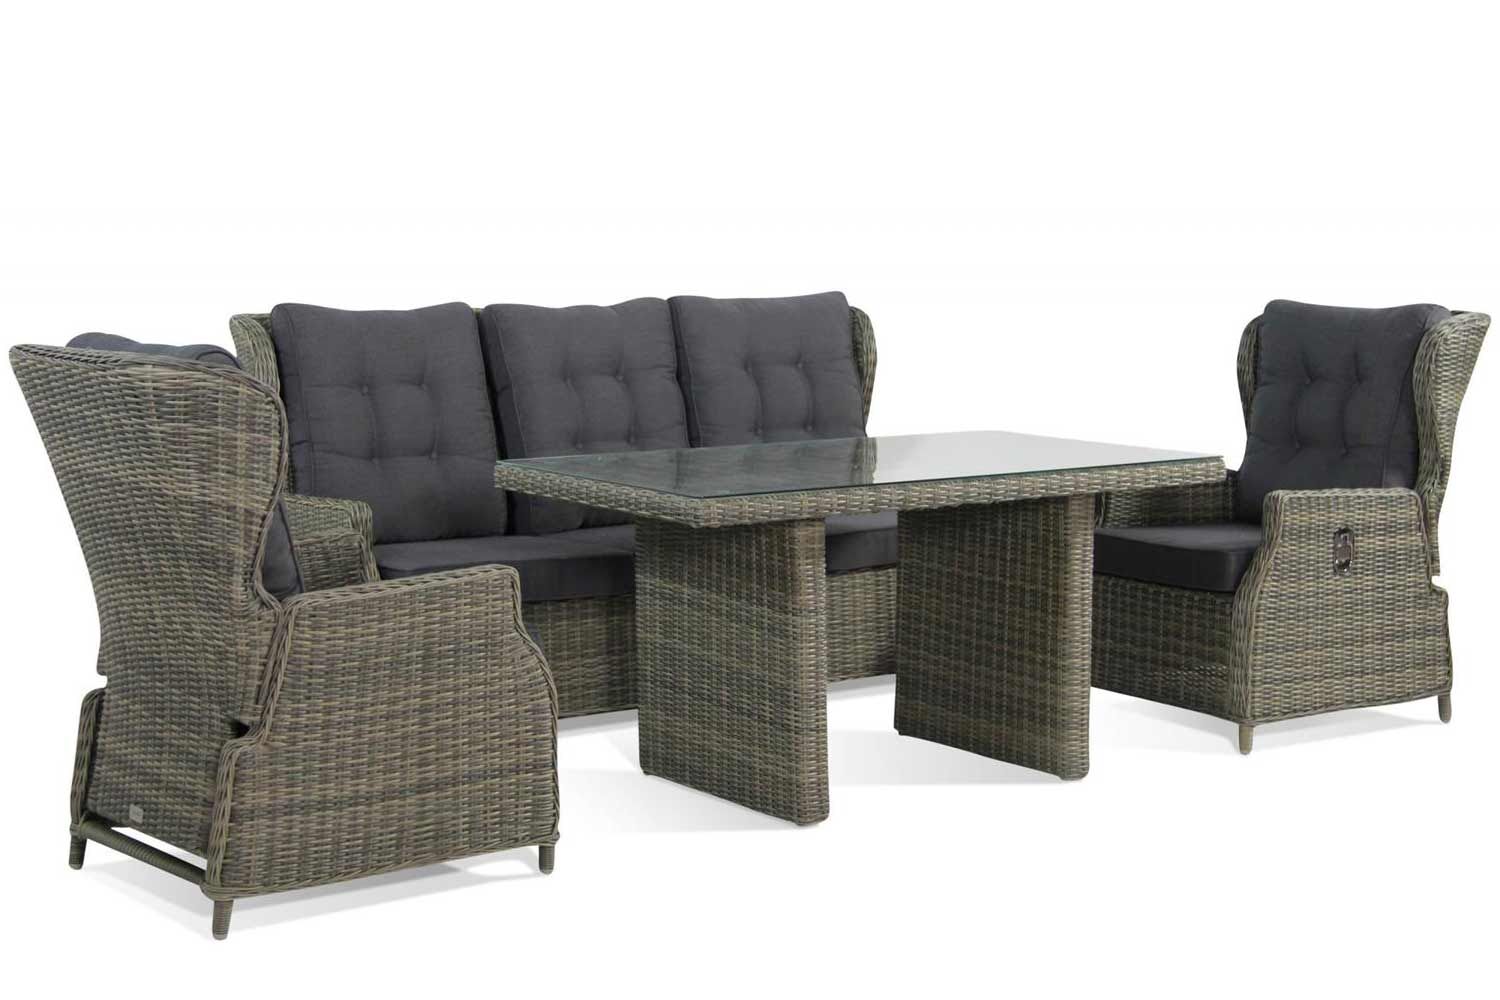 Garden Collections Royalty stoel-bank loungesets 4-delig